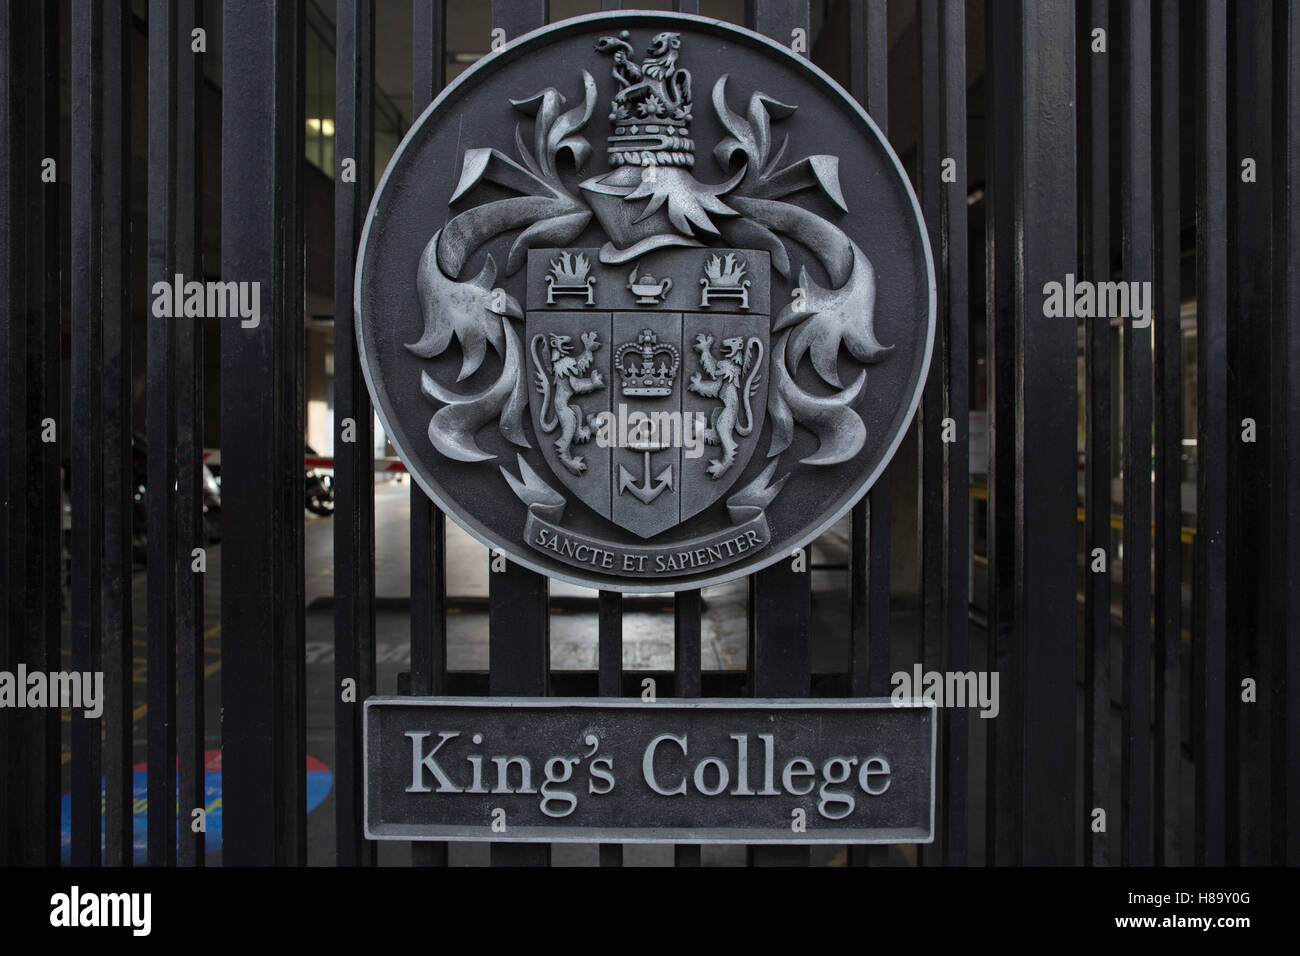 KIng's College London, the seal of King's College on the entrance gates facing the Strand in central London, England, UK Stock Photo